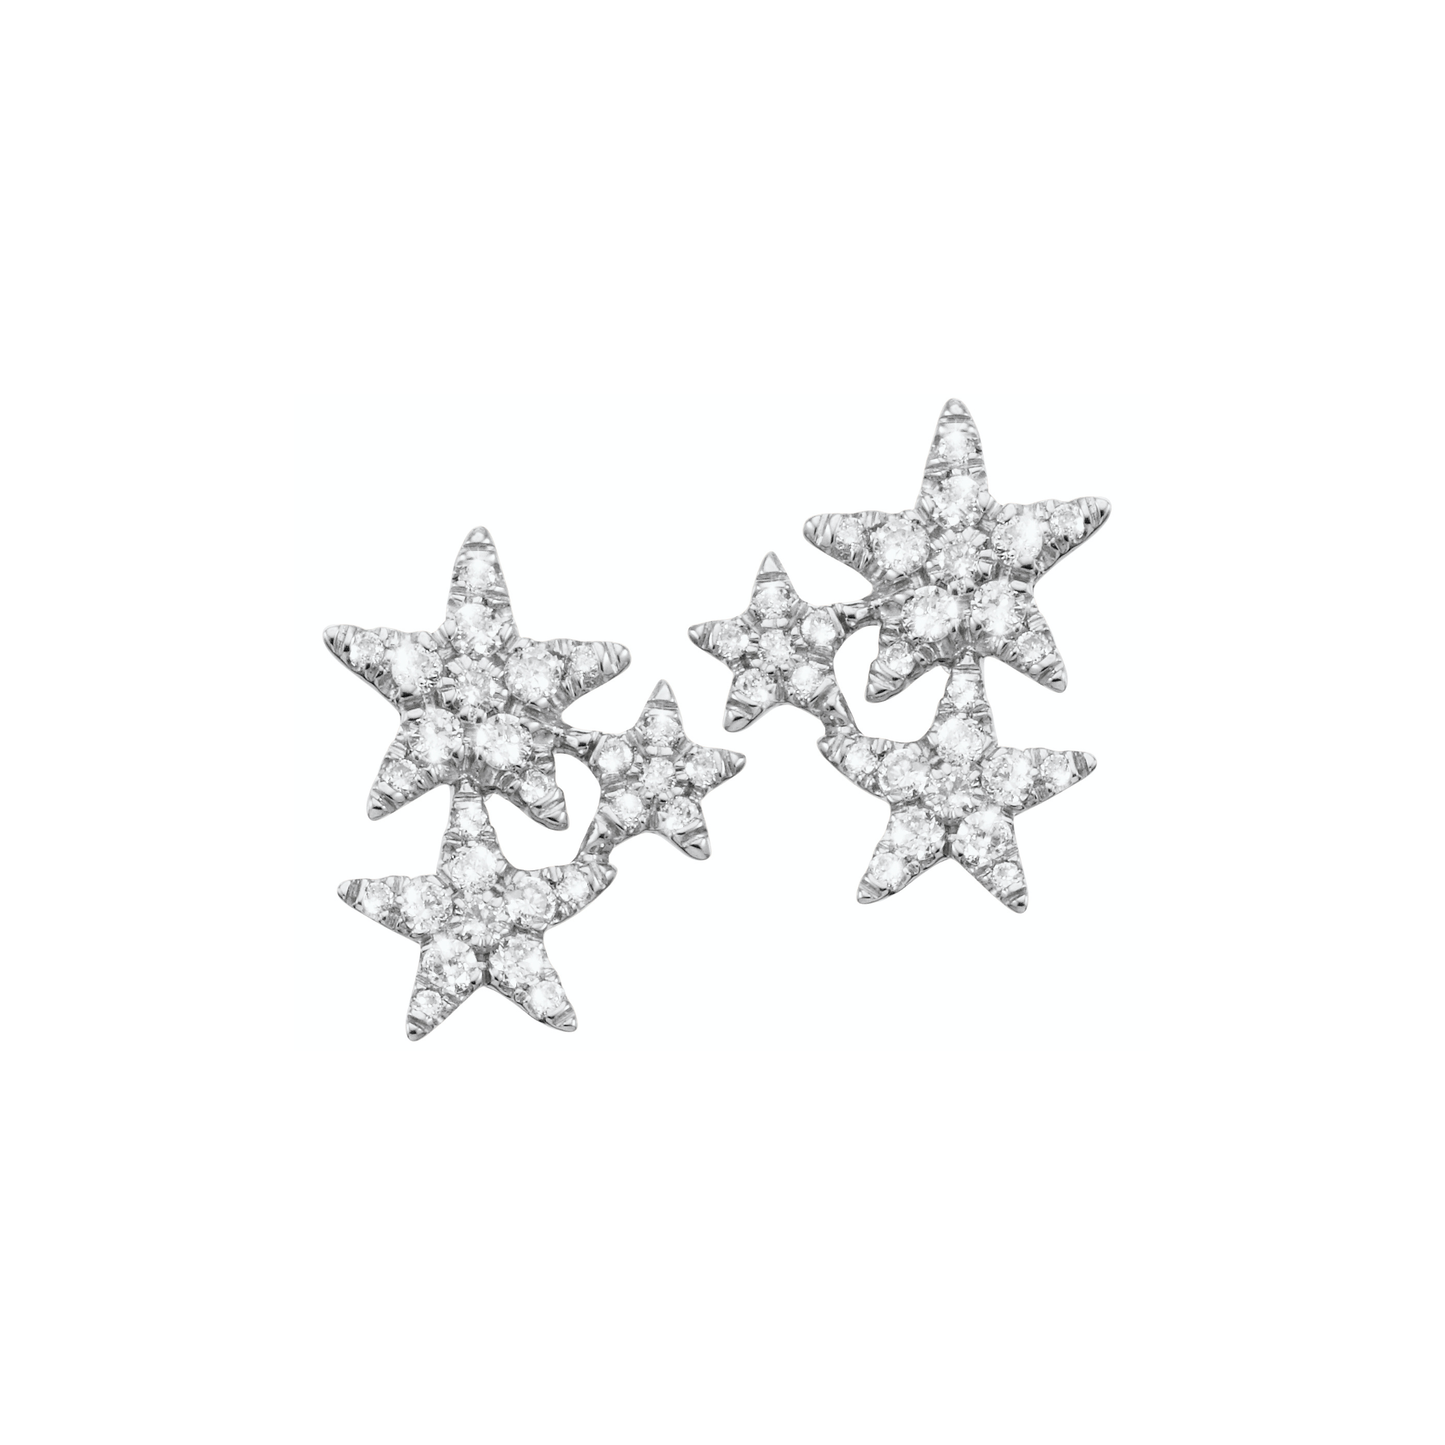 Designed in the form of sparkling stars and adorned with subtle diamonds. These adorable ear studs are carefully handcrafted and made of 18k white gold.